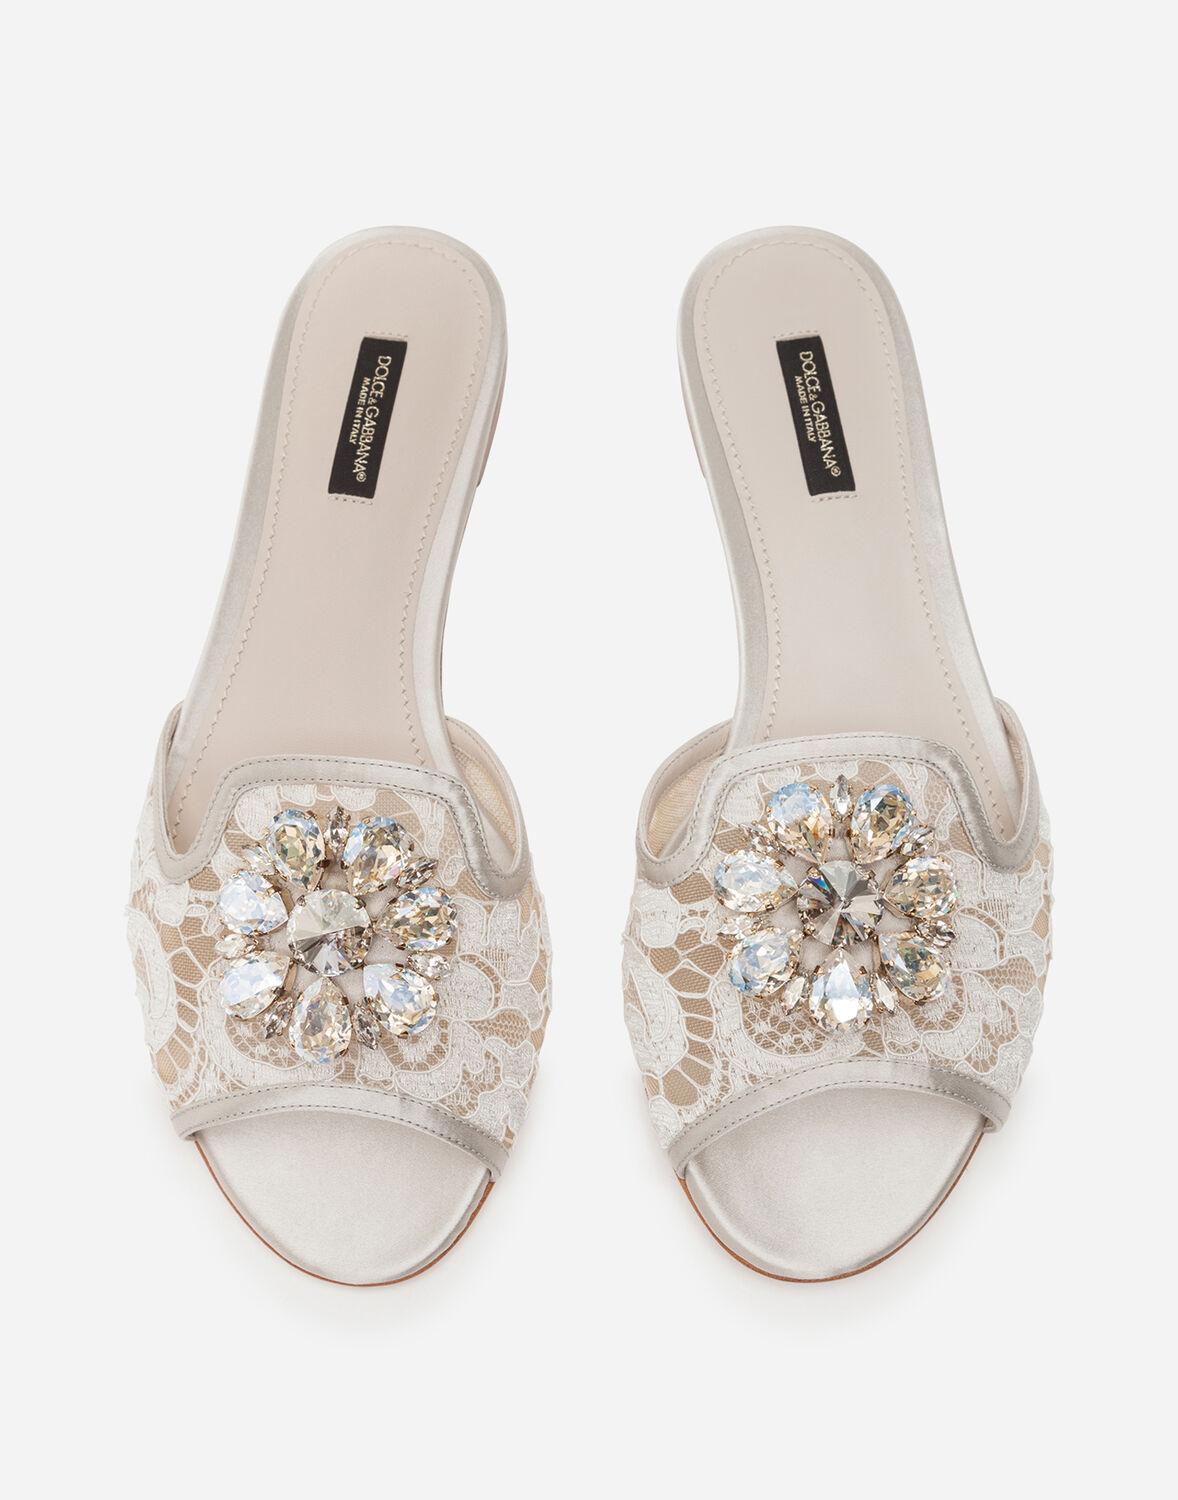 Dolce & Gabbana Slippers In Lace With Crystals in White - Lyst